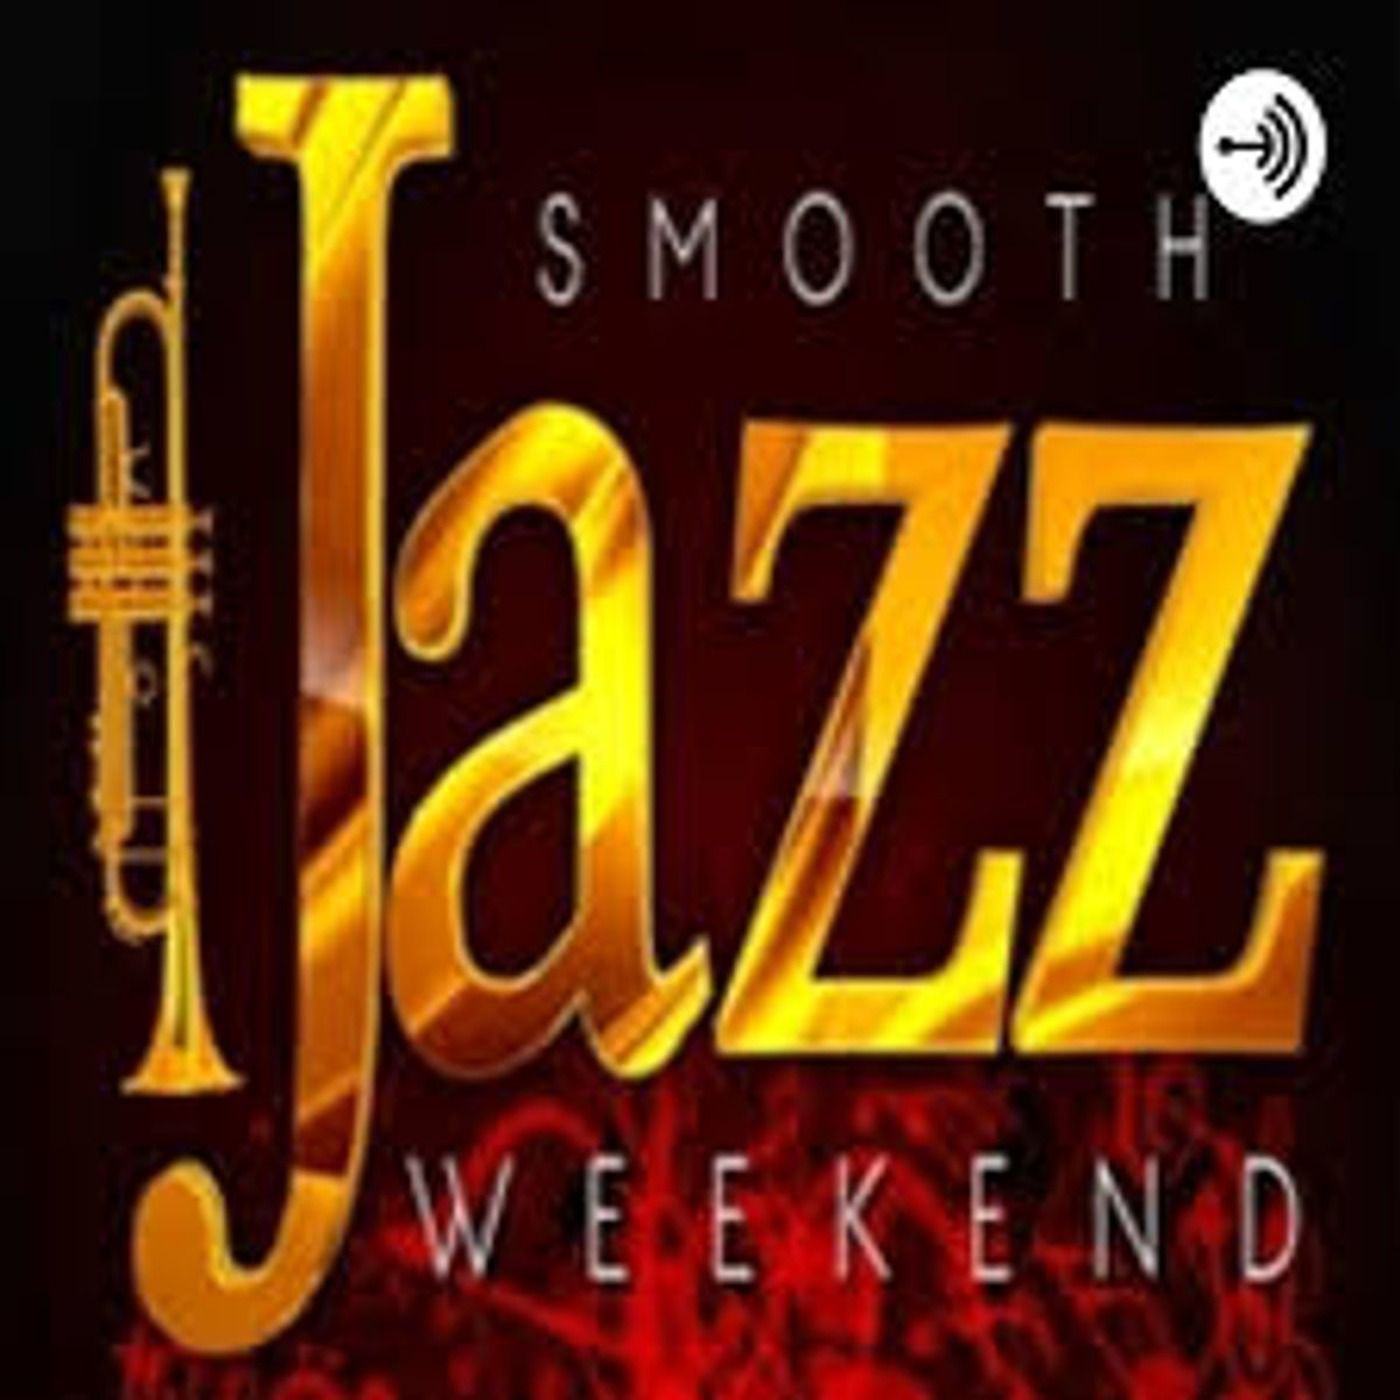 A highlight from Smooth Jazz Weekend with Tina E. (Long For You)